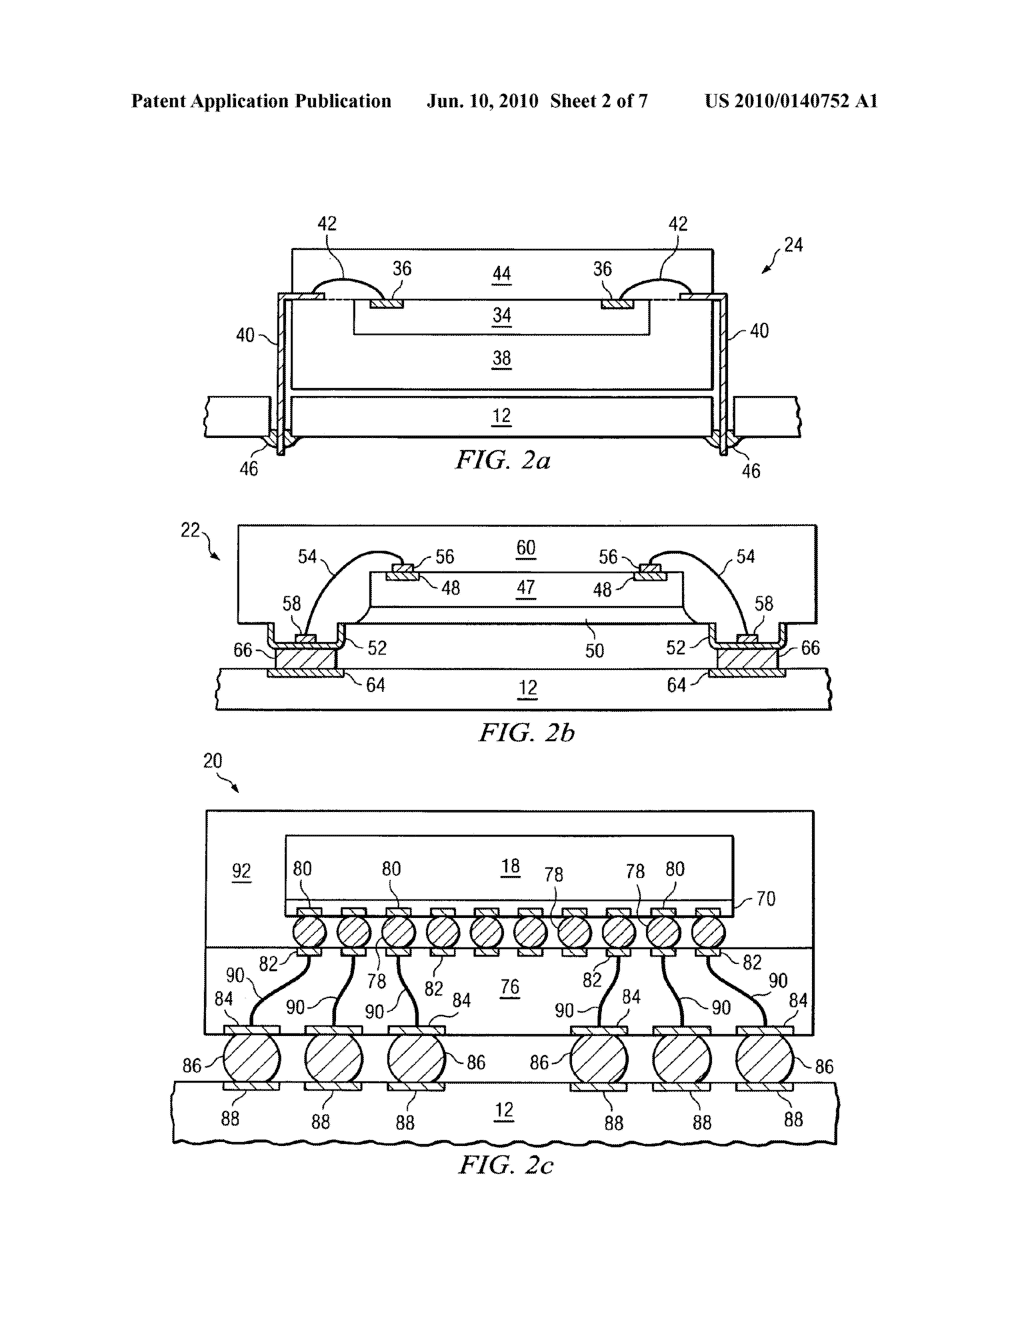 Semiconductor Device and Method of Forming Compliant Polymer Layer Between UBM and Conformal Dielectric Layer/RDL for Stress Relief - diagram, schematic, and image 03